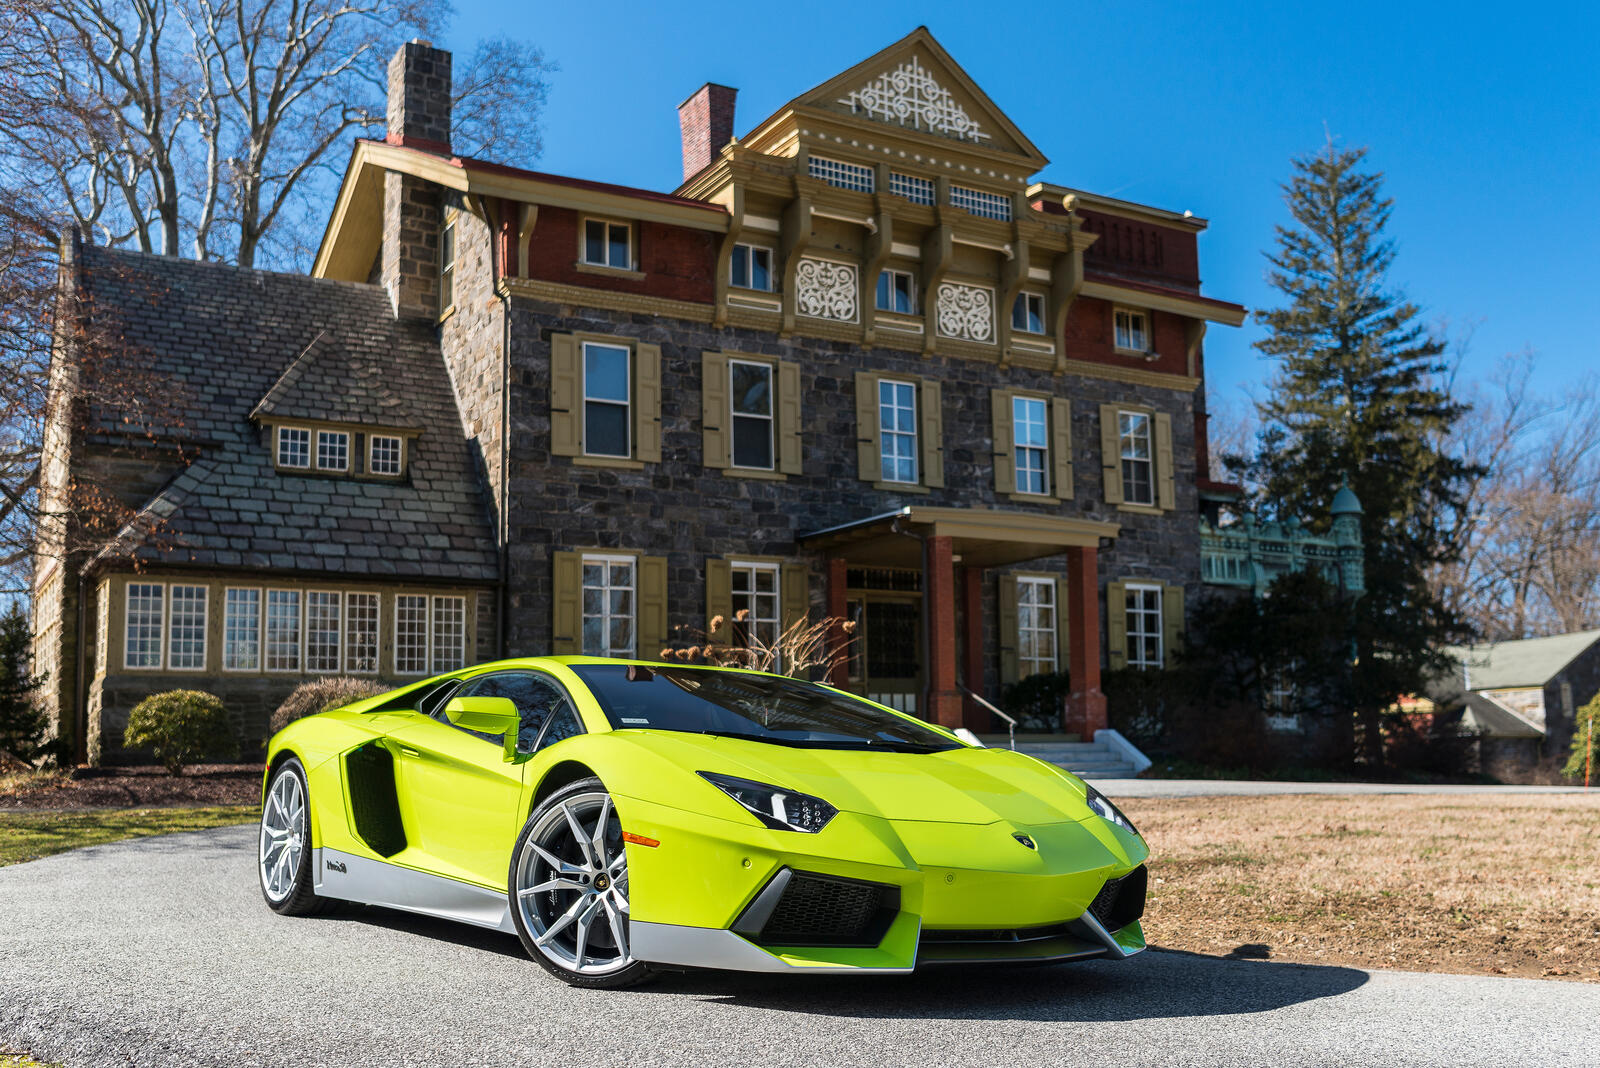 Free photo Lamborghini Aventador in front of the mansion.